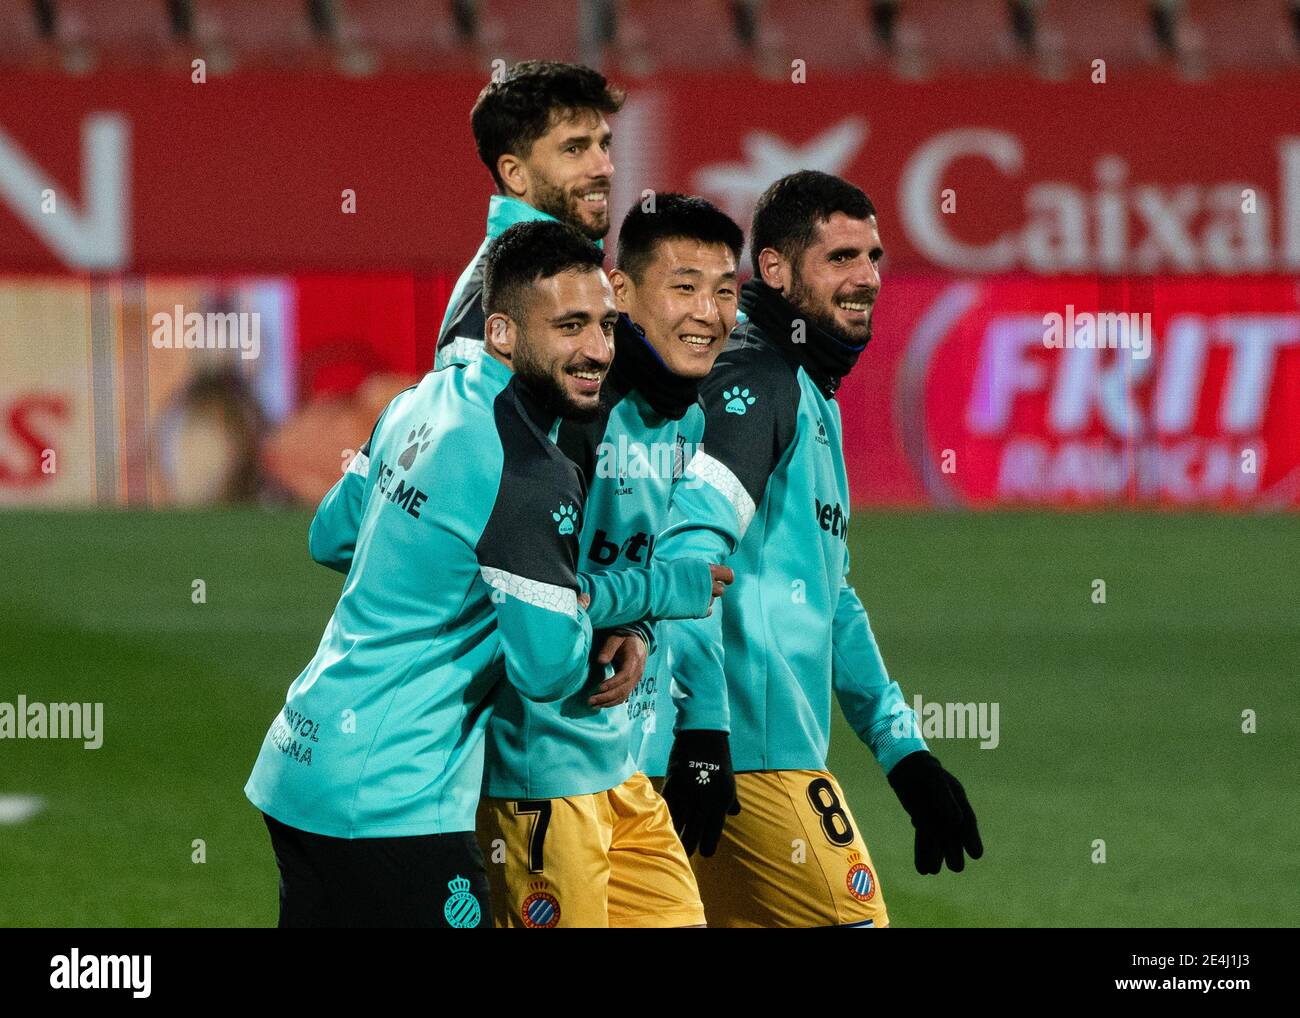 Girona, Spain. 23rd Jan, 2021. Espanyol's Wu Lei (C) warms up with his teammates Matias Vargas(L), Fran Merida (R) and Didac Vila prior to a Spanish second division league match between Girona FC and RCD Espanyol in Girona, Spain, on Jan. 23, 2021. Credit: Joan Gosa/Xinhua/Alamy Live News Stock Photo